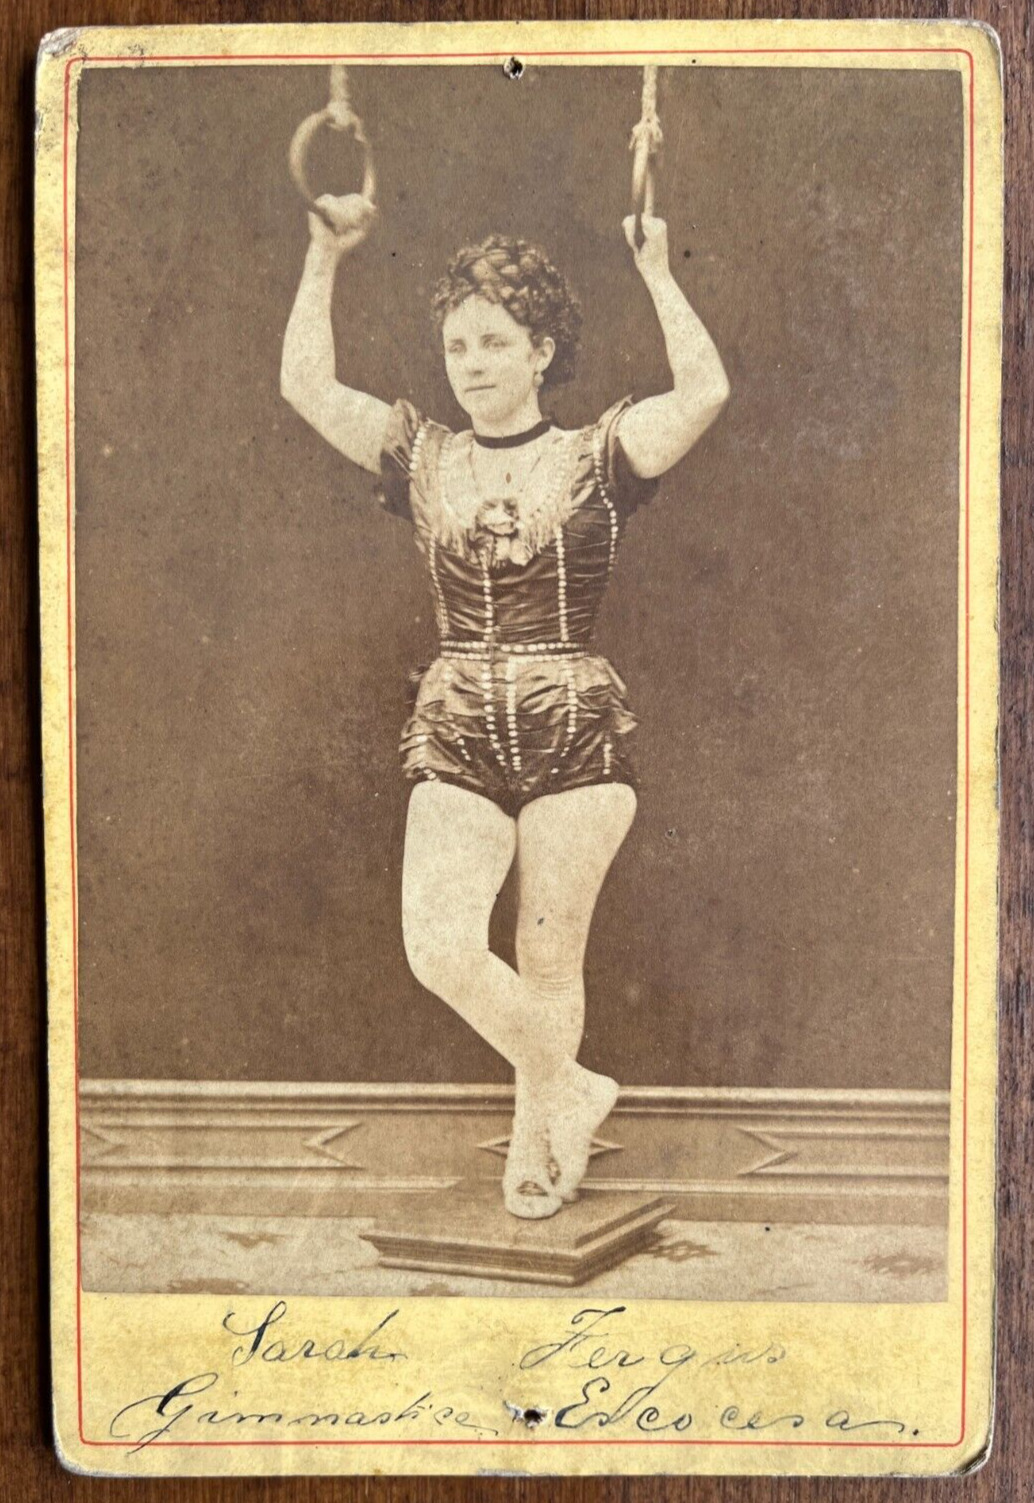 Antique Cabinet Card, Woman Acrobat Gymnist Carnival? Circus? Signed Photograph